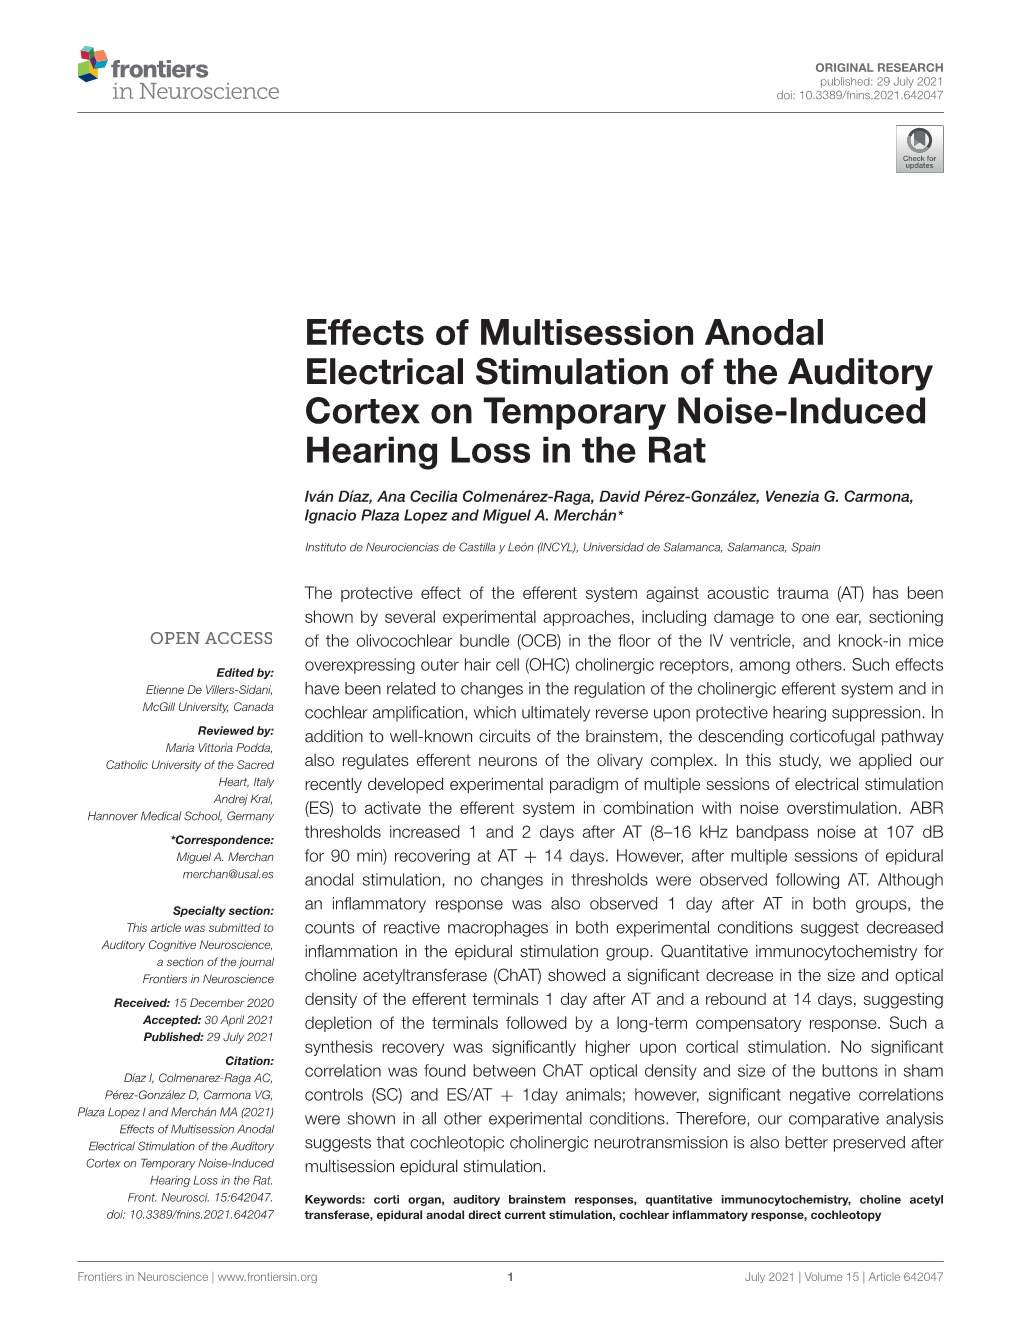 Effects of Multisession Anodal Electrical Stimulation of the Auditory Cortex on Temporary Noise-Induced Hearing Loss in the Rat